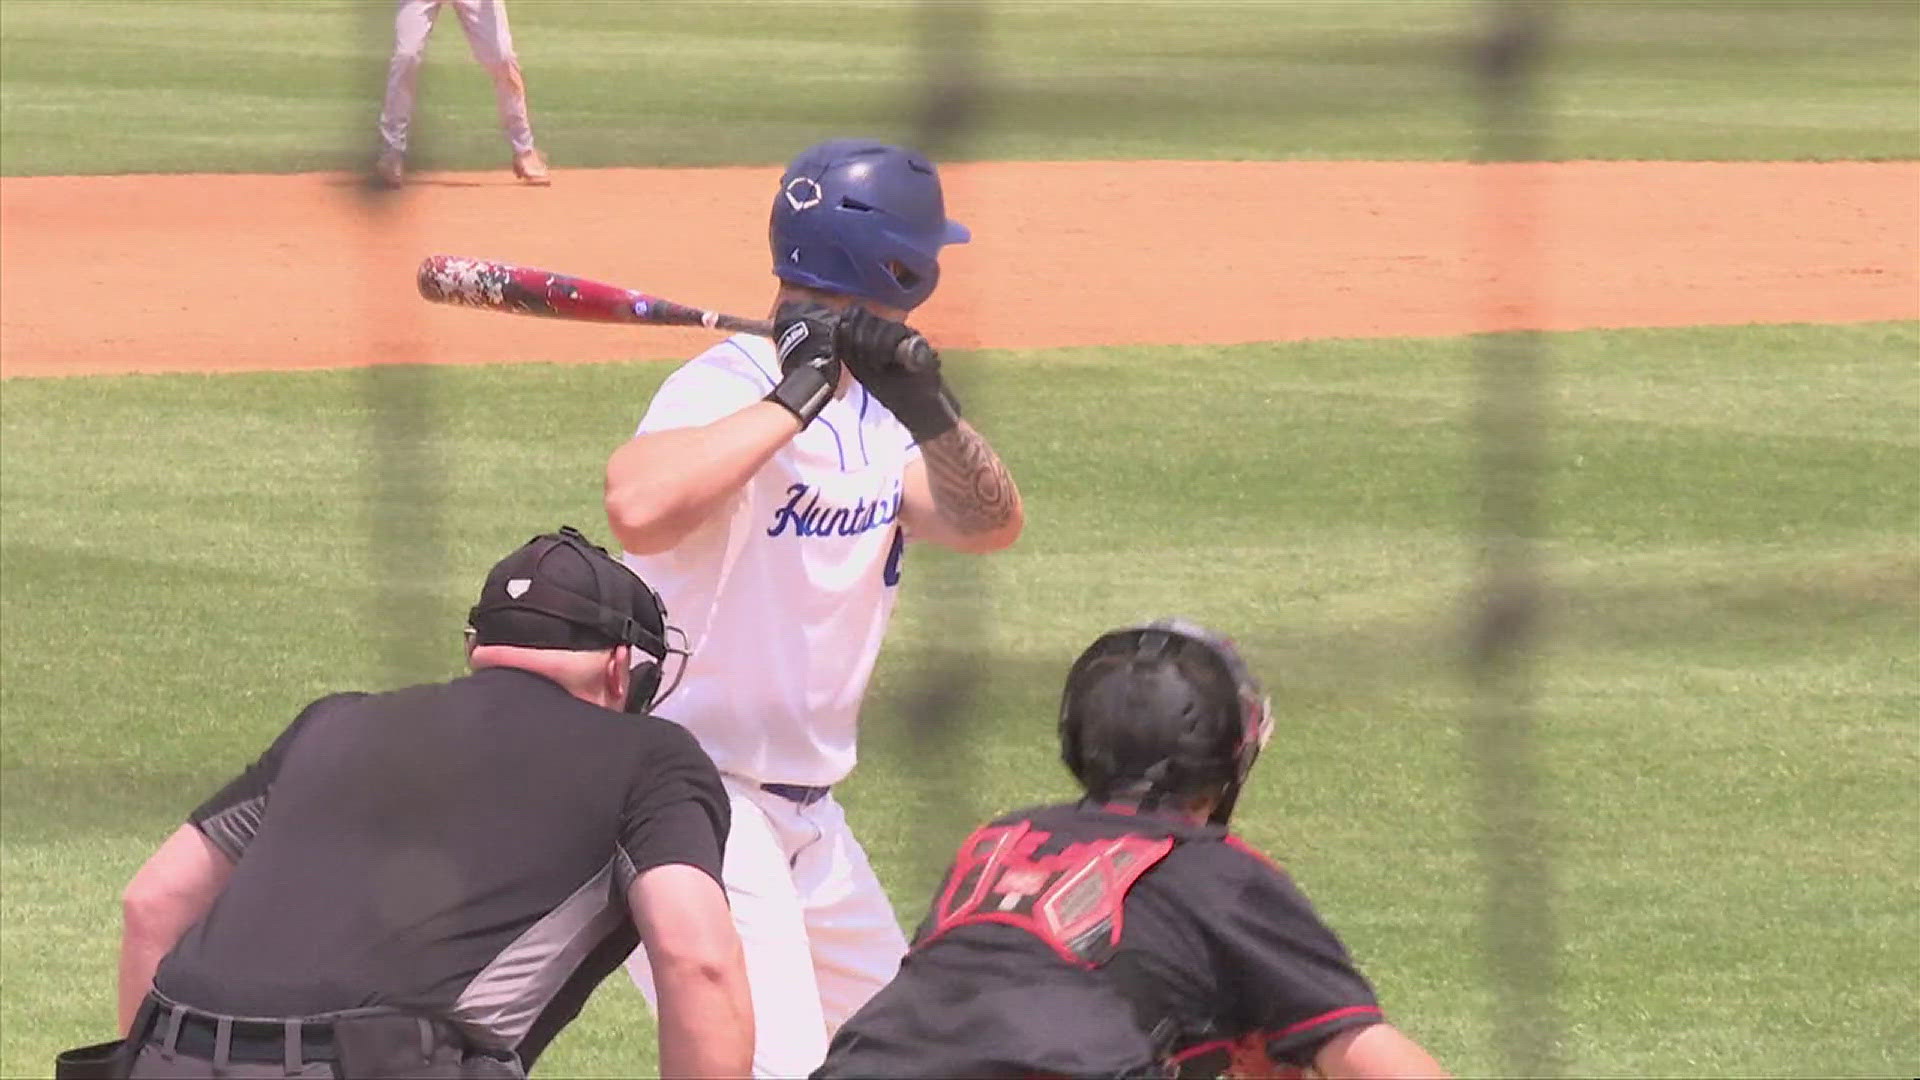 UAH Baseball ended the season with two wins over Union University.